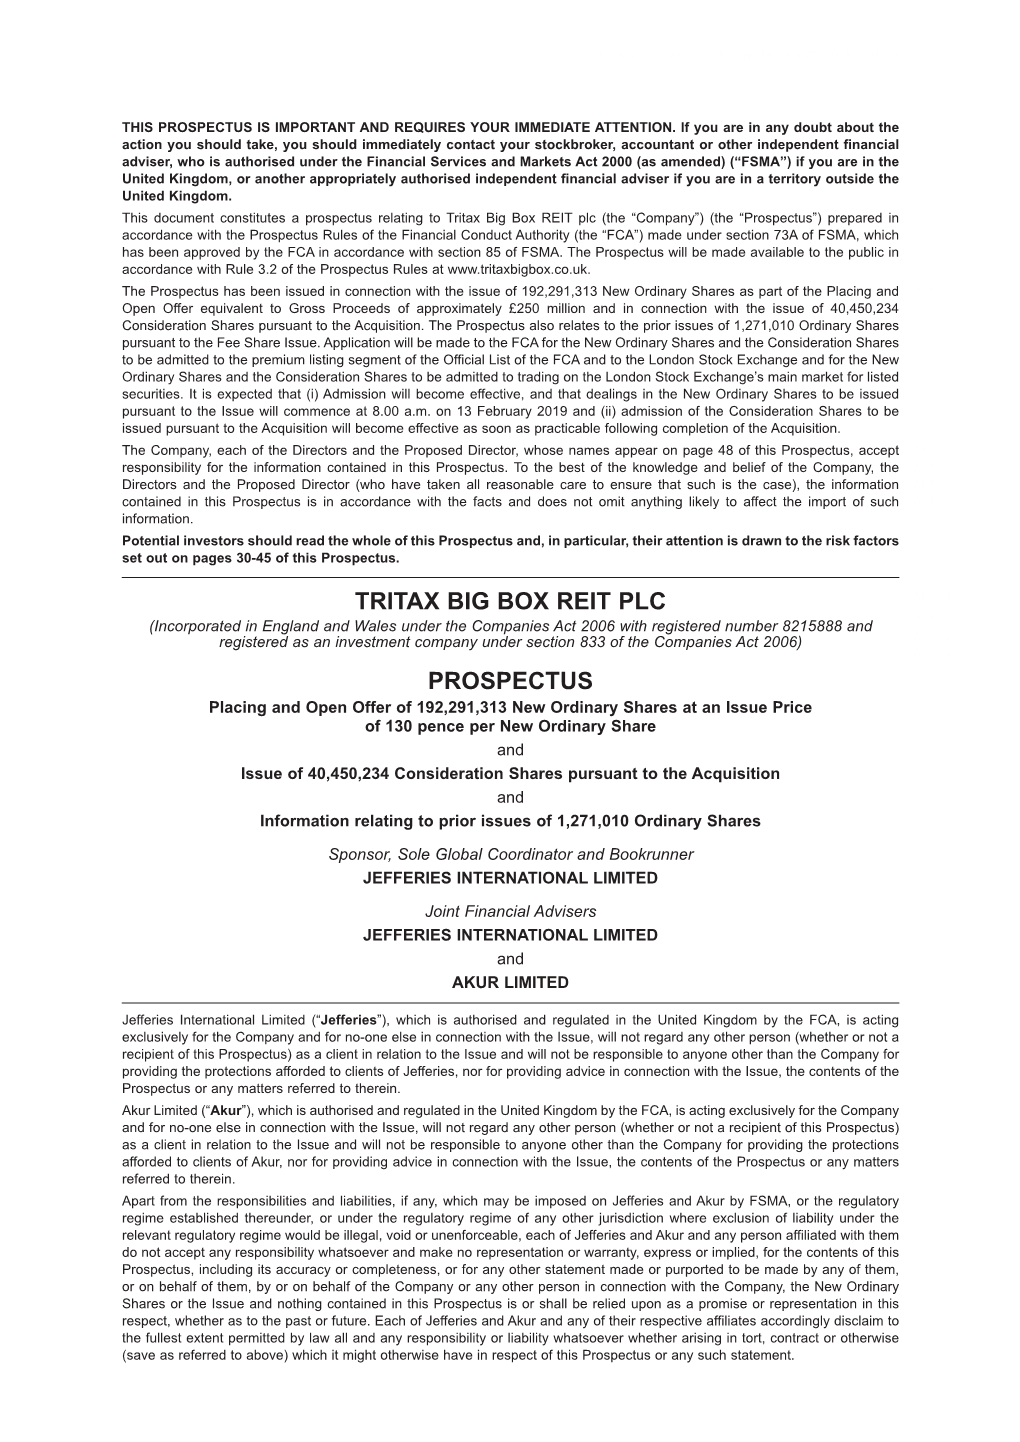 171875 Project Hurley Prospectus Intro a 171875 Project Hurley Prospectus Intro a 25/01/2019 10:59 Page 1